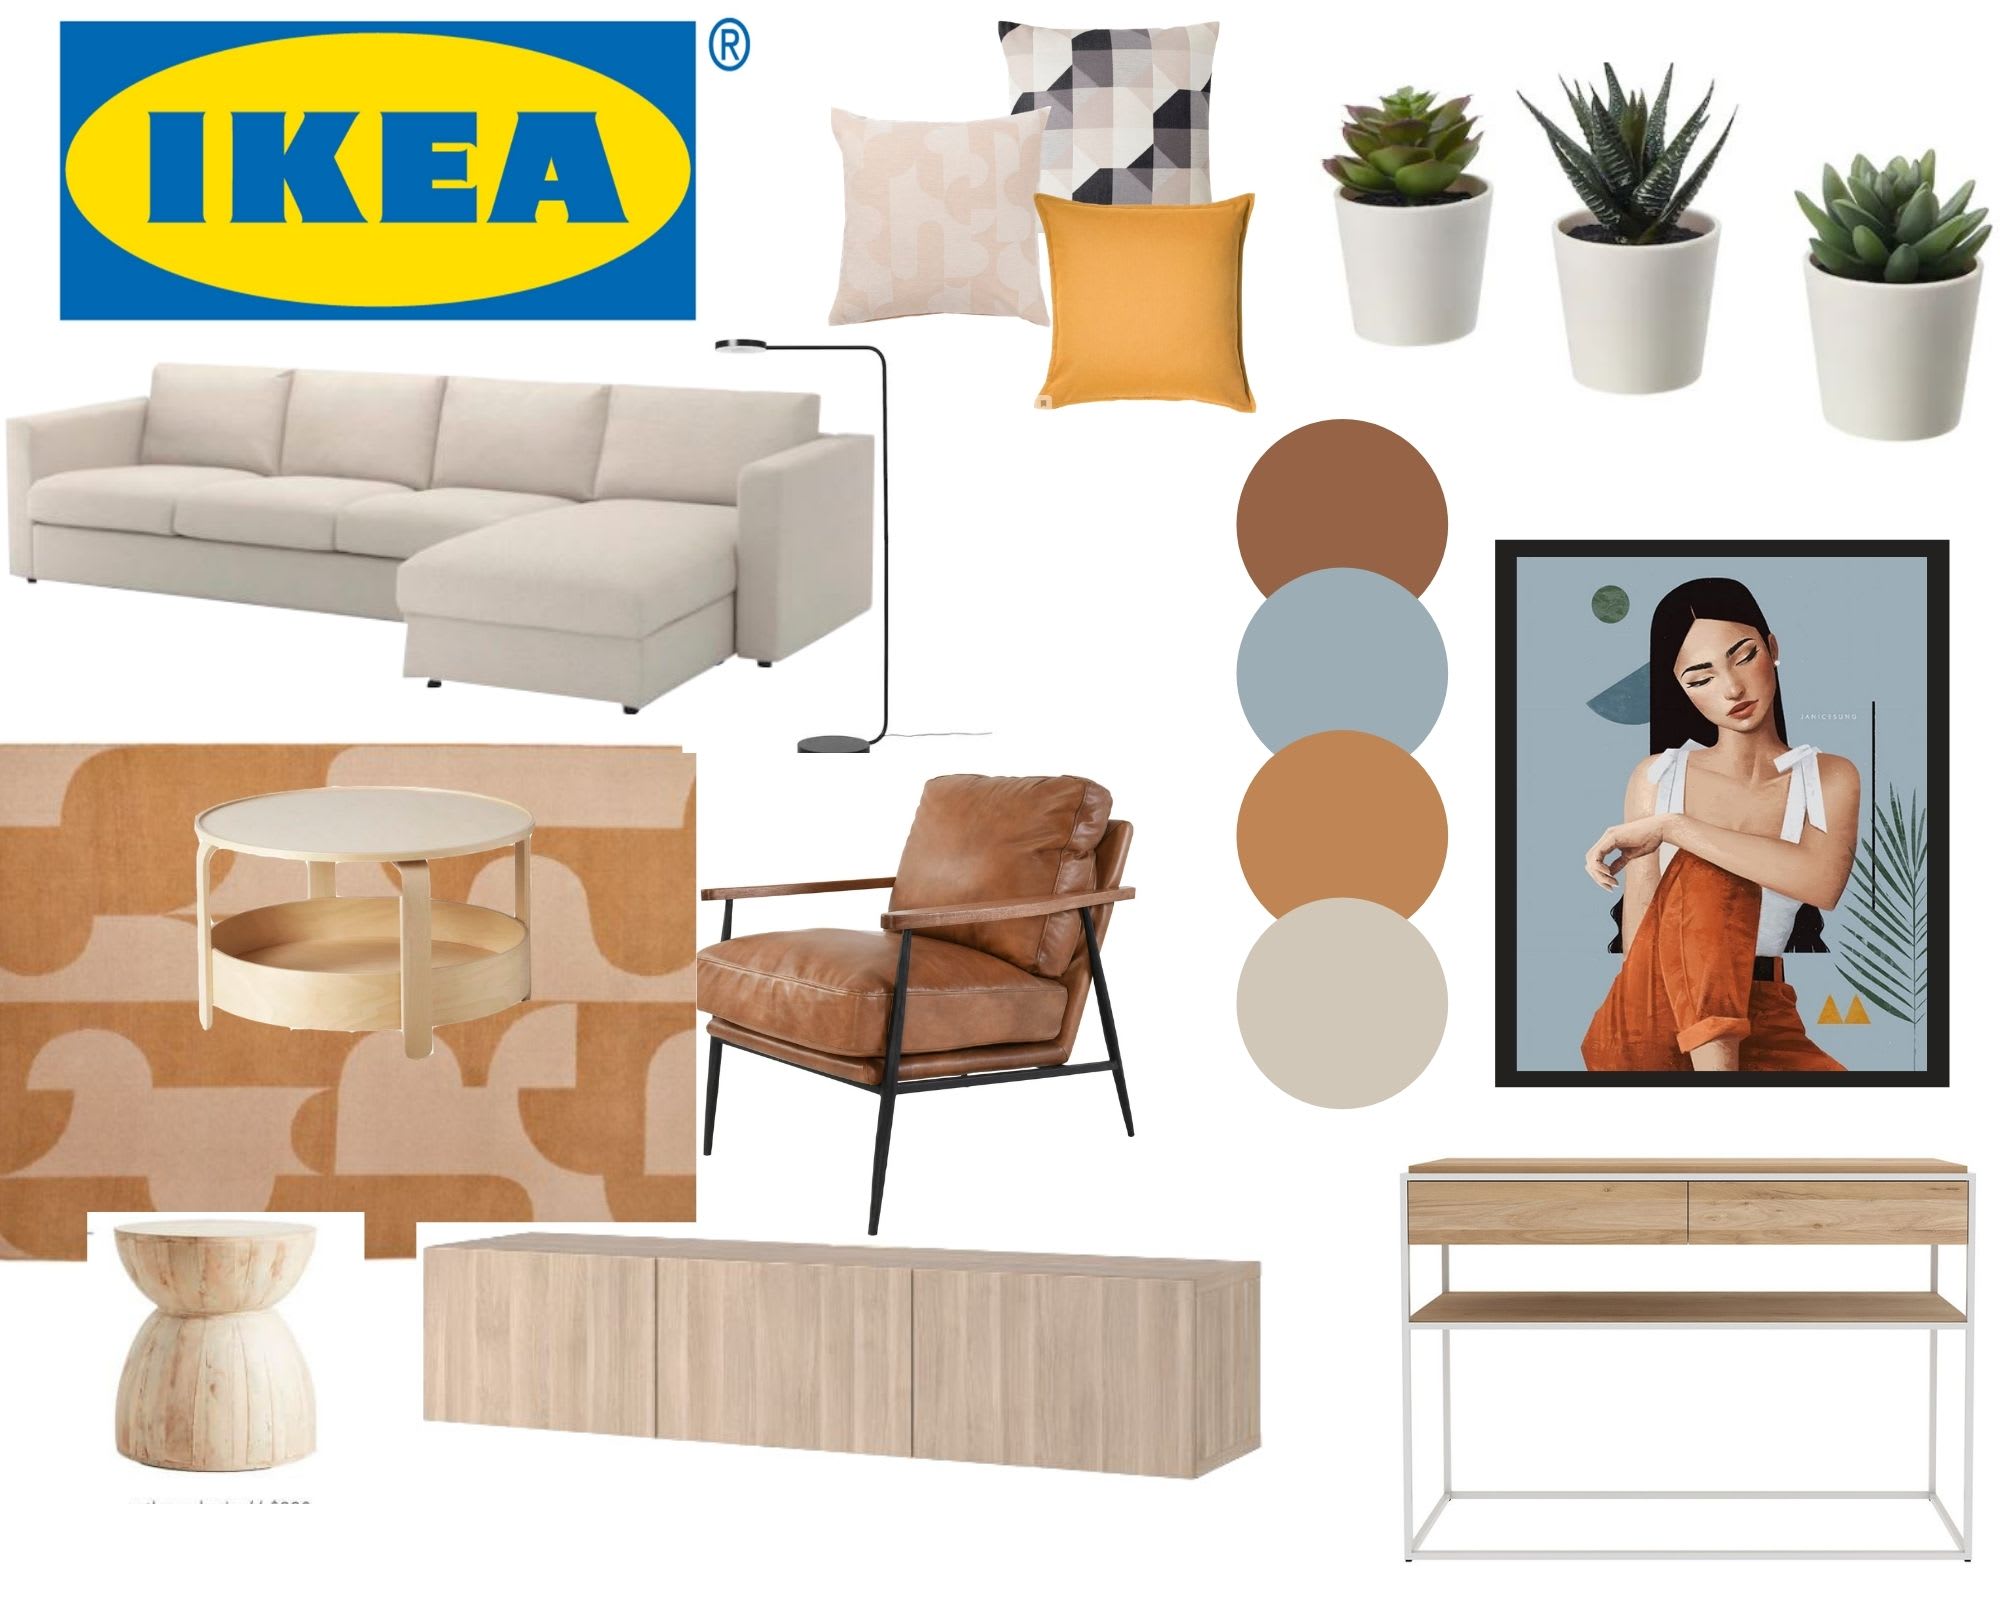 vloeiend Downtown zaad Professional ikea moodboard with links by Samgina9999a | Fiverr